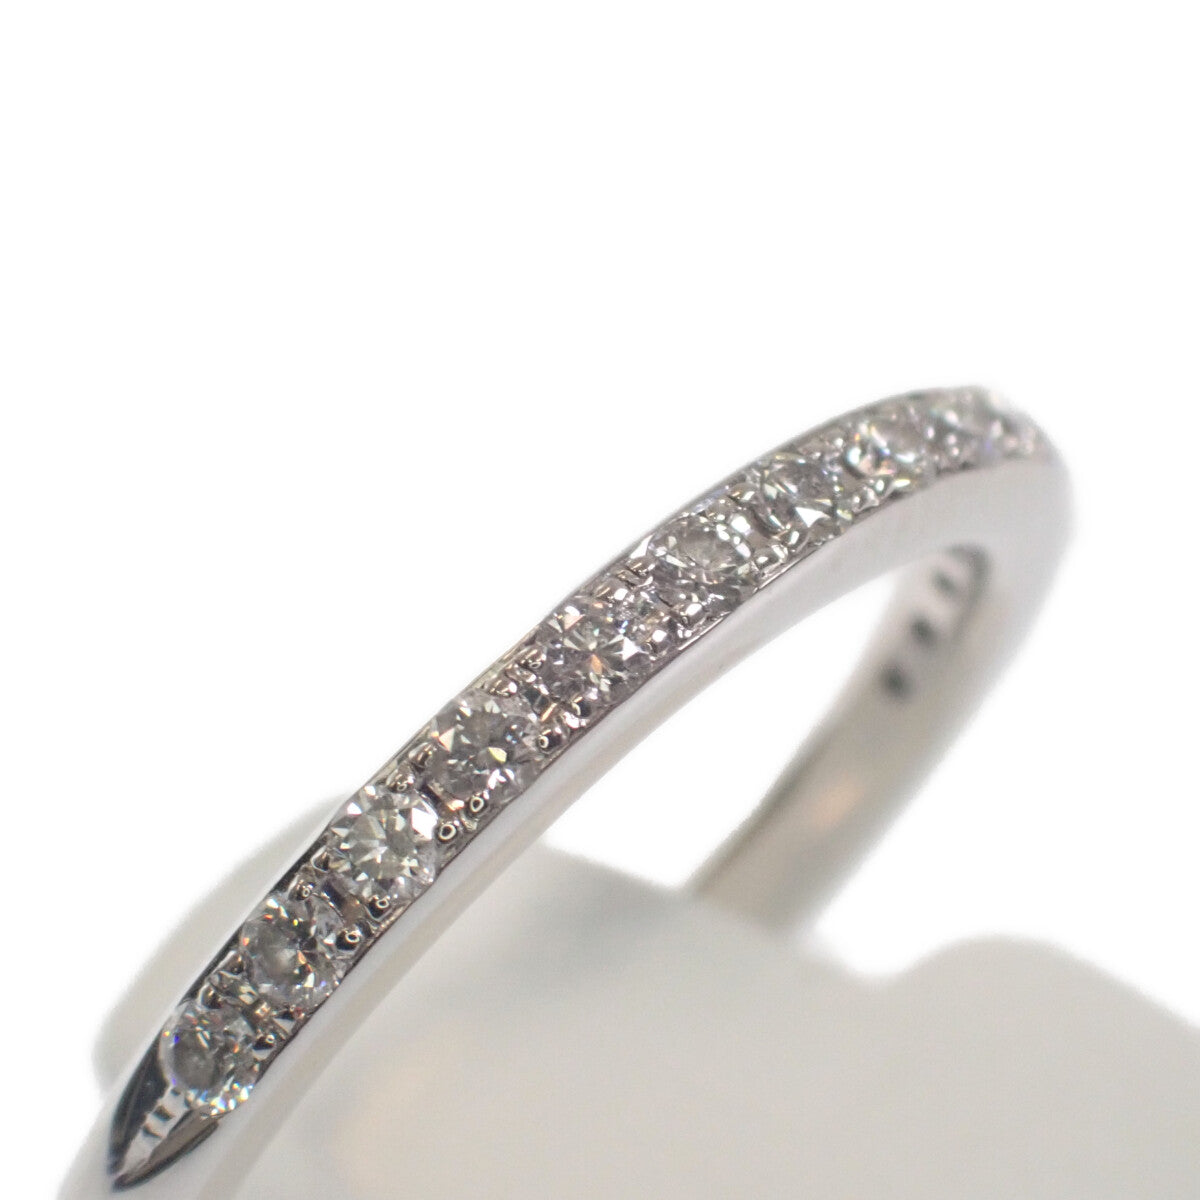 Half Eternity Design Ring in PT900 Platinum with 0.21Ct Diamonds, Size 10 - Silver, for Women- Classic and Elegant- (Pre-owned)